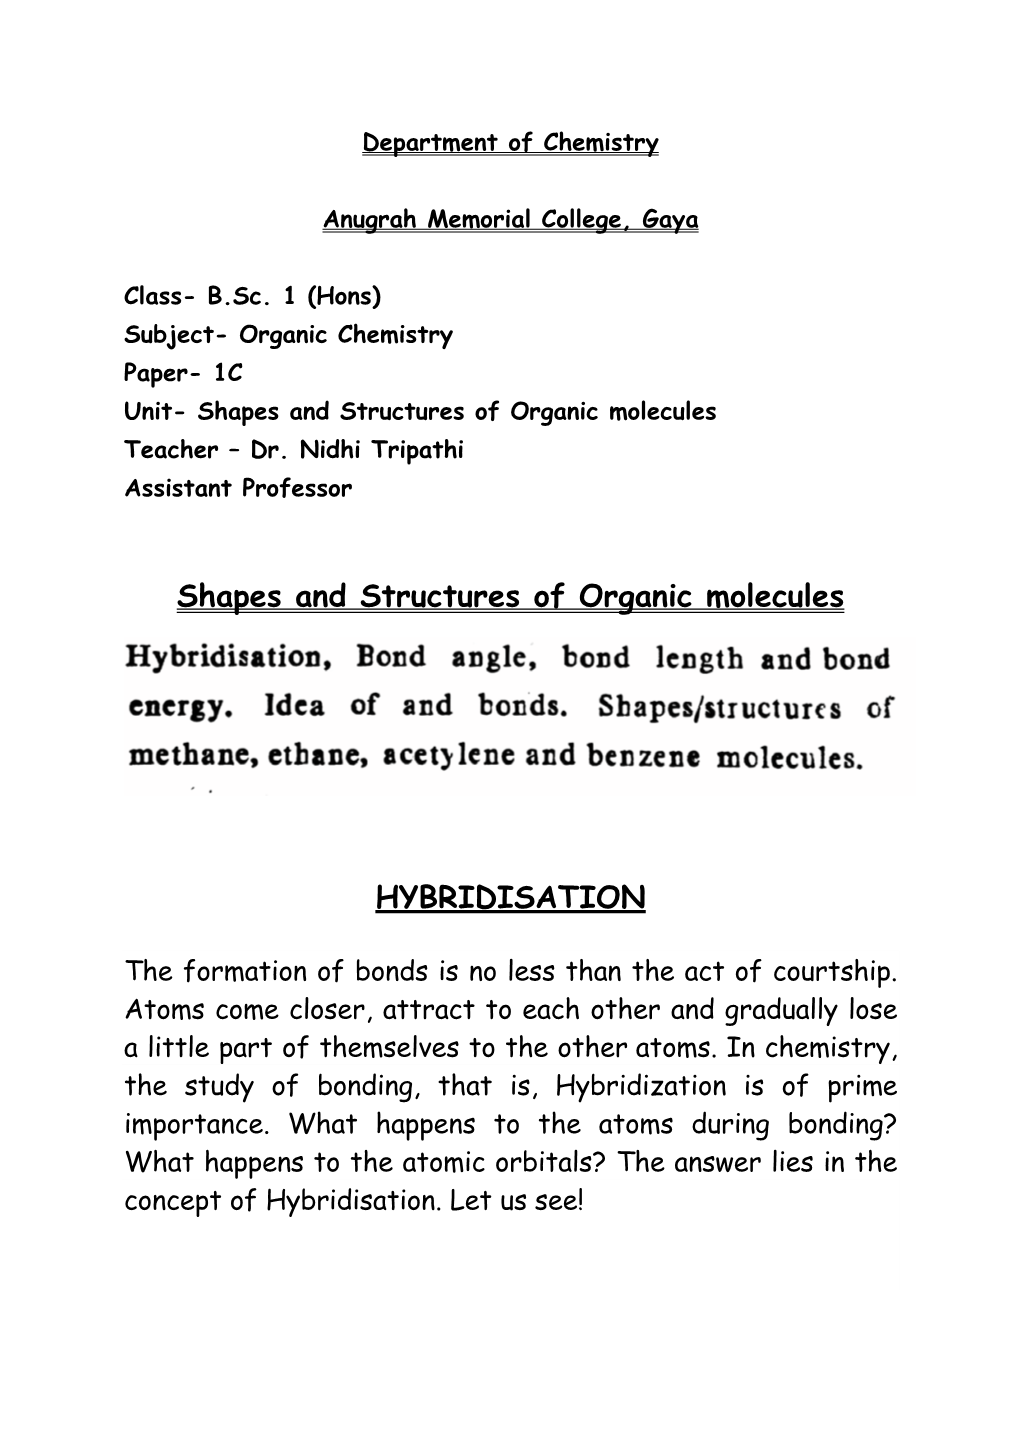 Shapes and Structures of Organic Molecules HYBRIDISATION